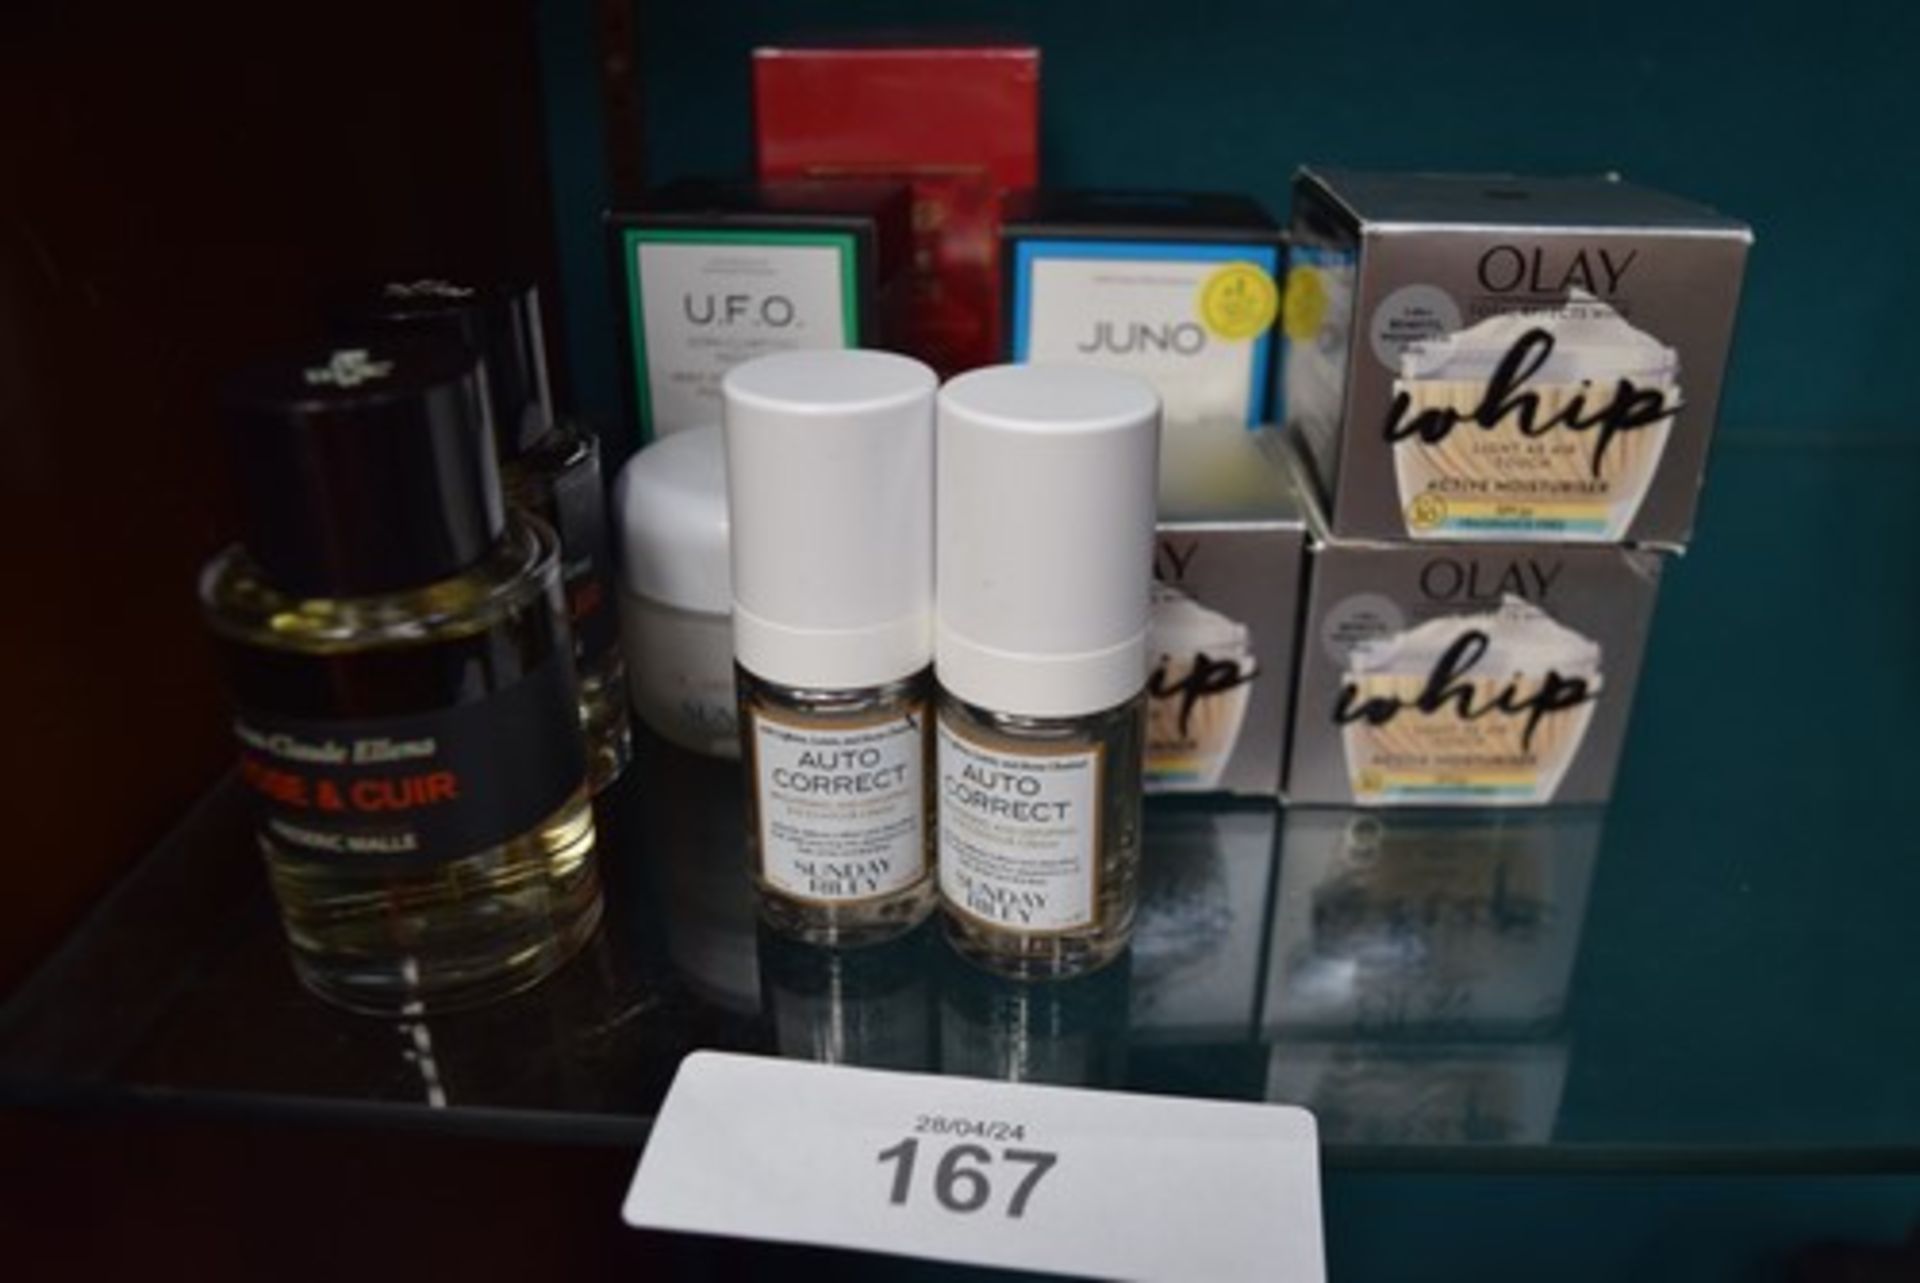 A small selection of beauty products, including 3 x 5ml tubs of Olay, whip light as air touch active